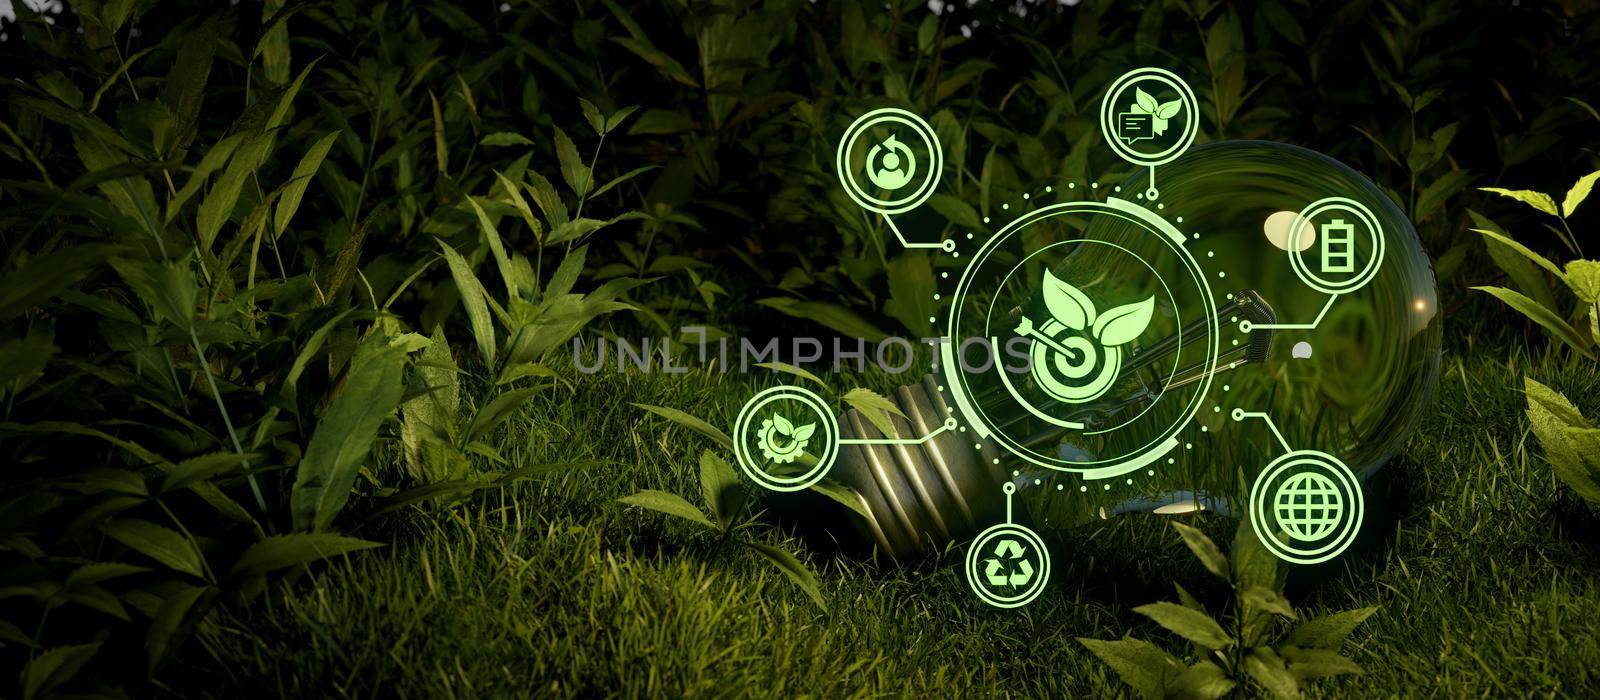 Ecosystem and digital technology concept lightbulb green ecological call to recycle and reuse in the form of a pond with a recycling symbol 3D Illustration